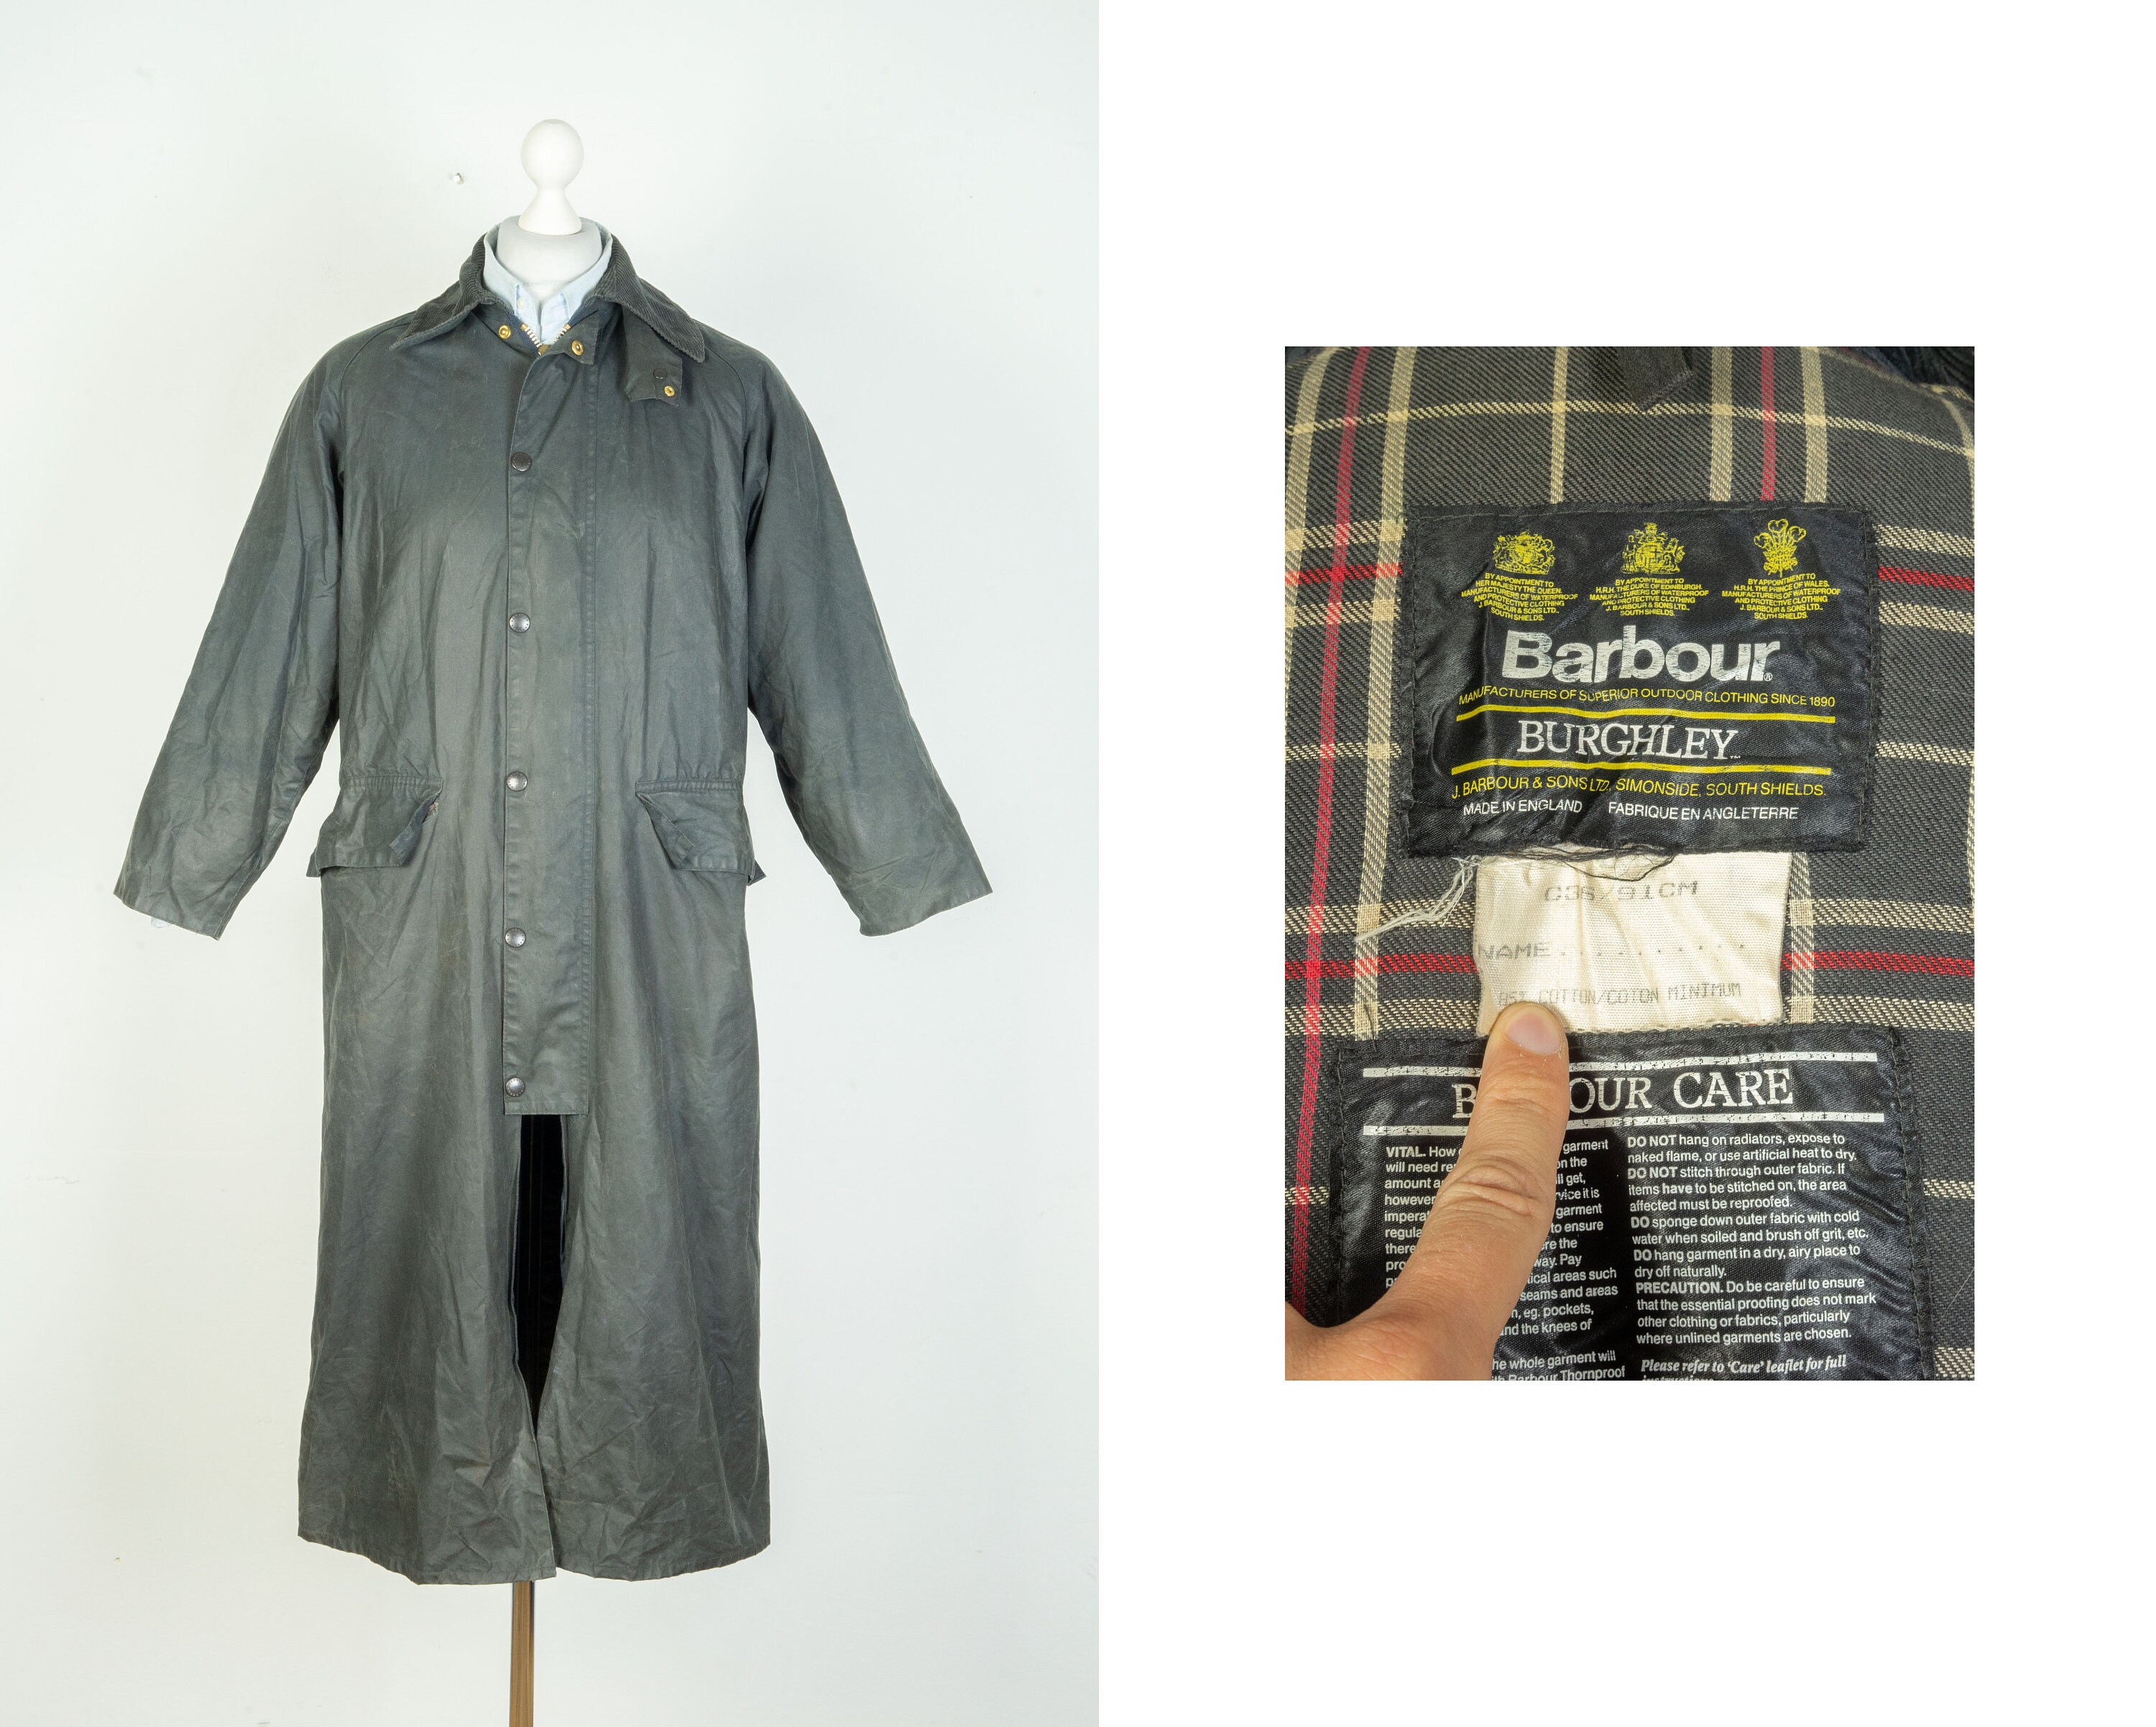 Barbour Burghley - Etsy